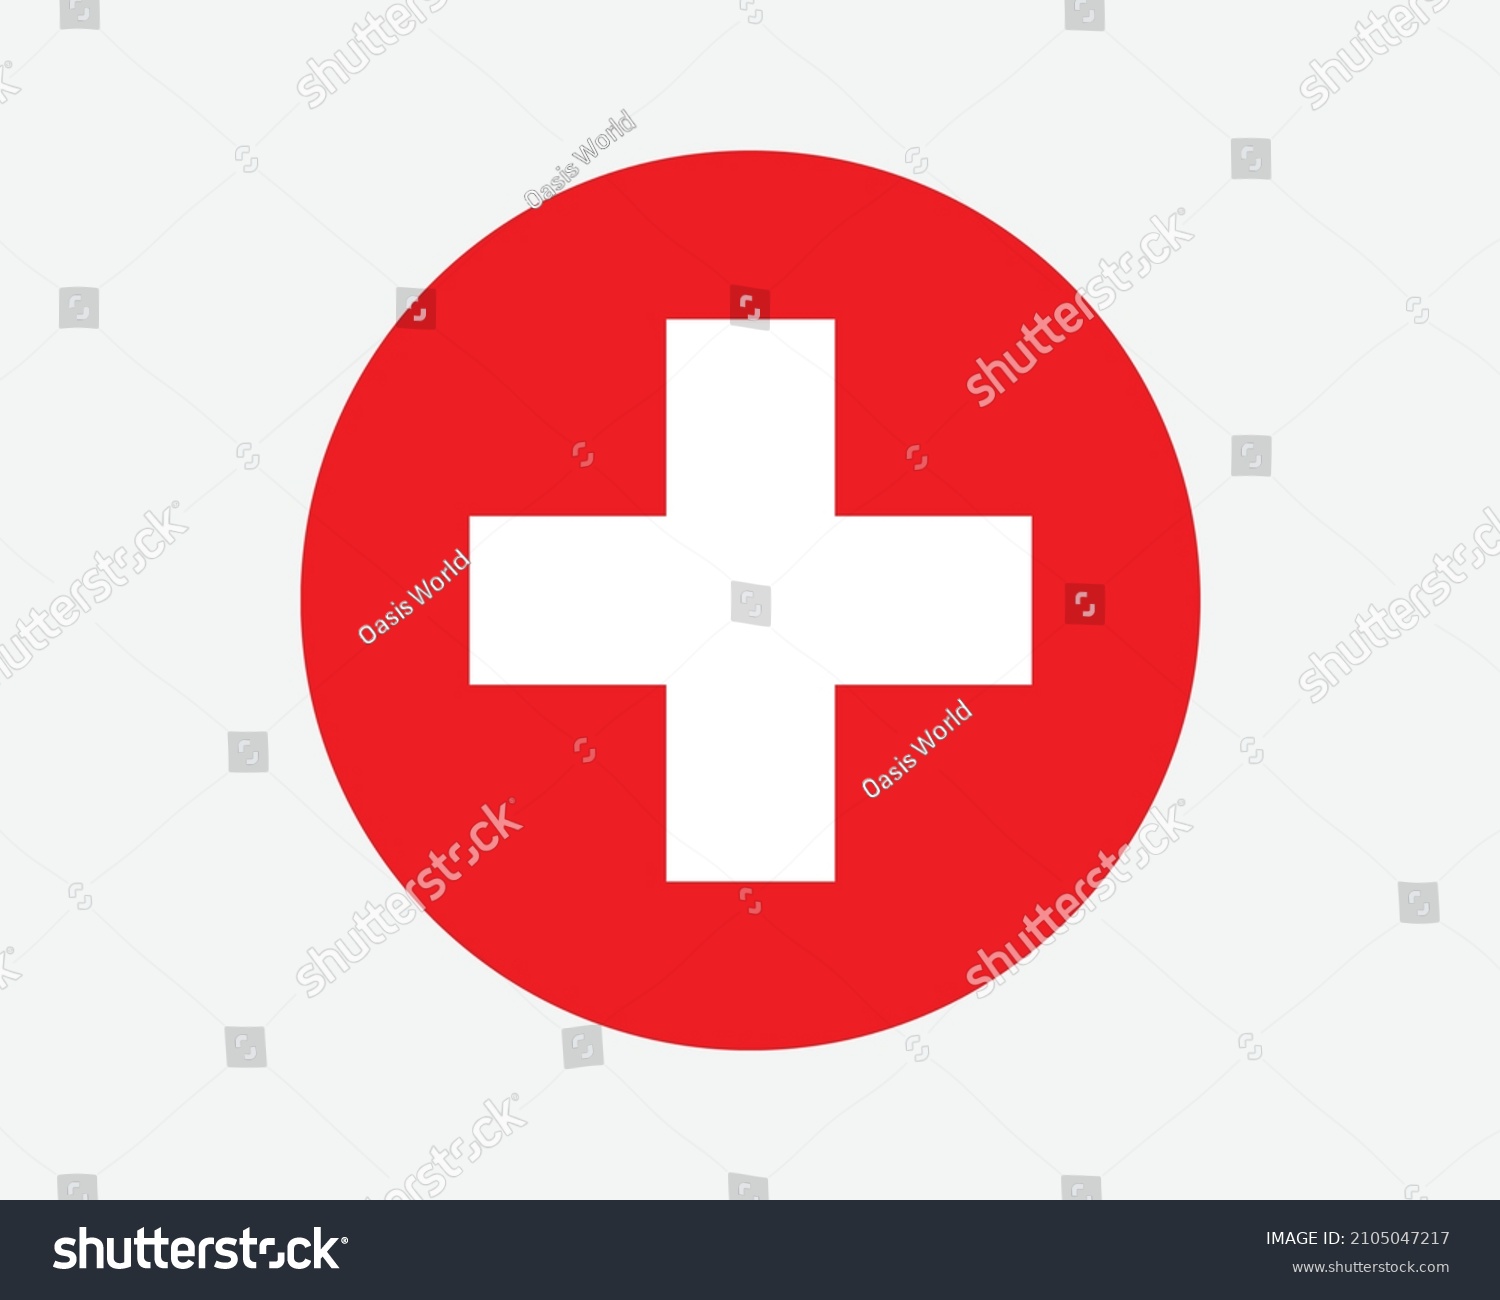 SVG of Switzerland Round Country Flag. Swiss Circle National Flag. Swiss Confederation Circular Shape Button Banner. EPS Vector Illustration. svg